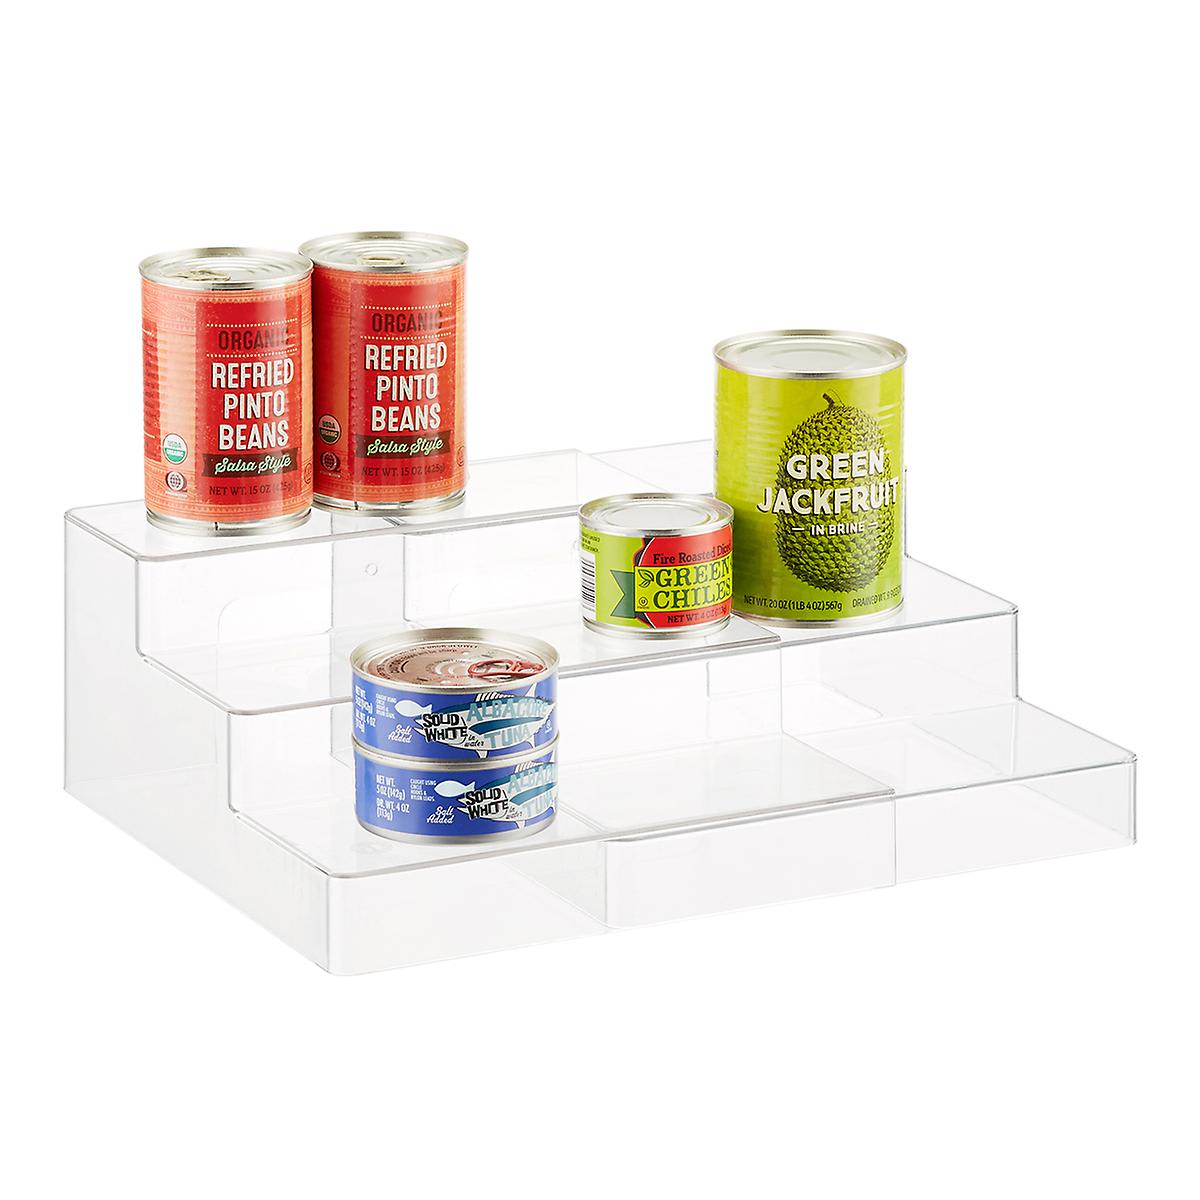 The Home Edit launches new Container Store collaboration